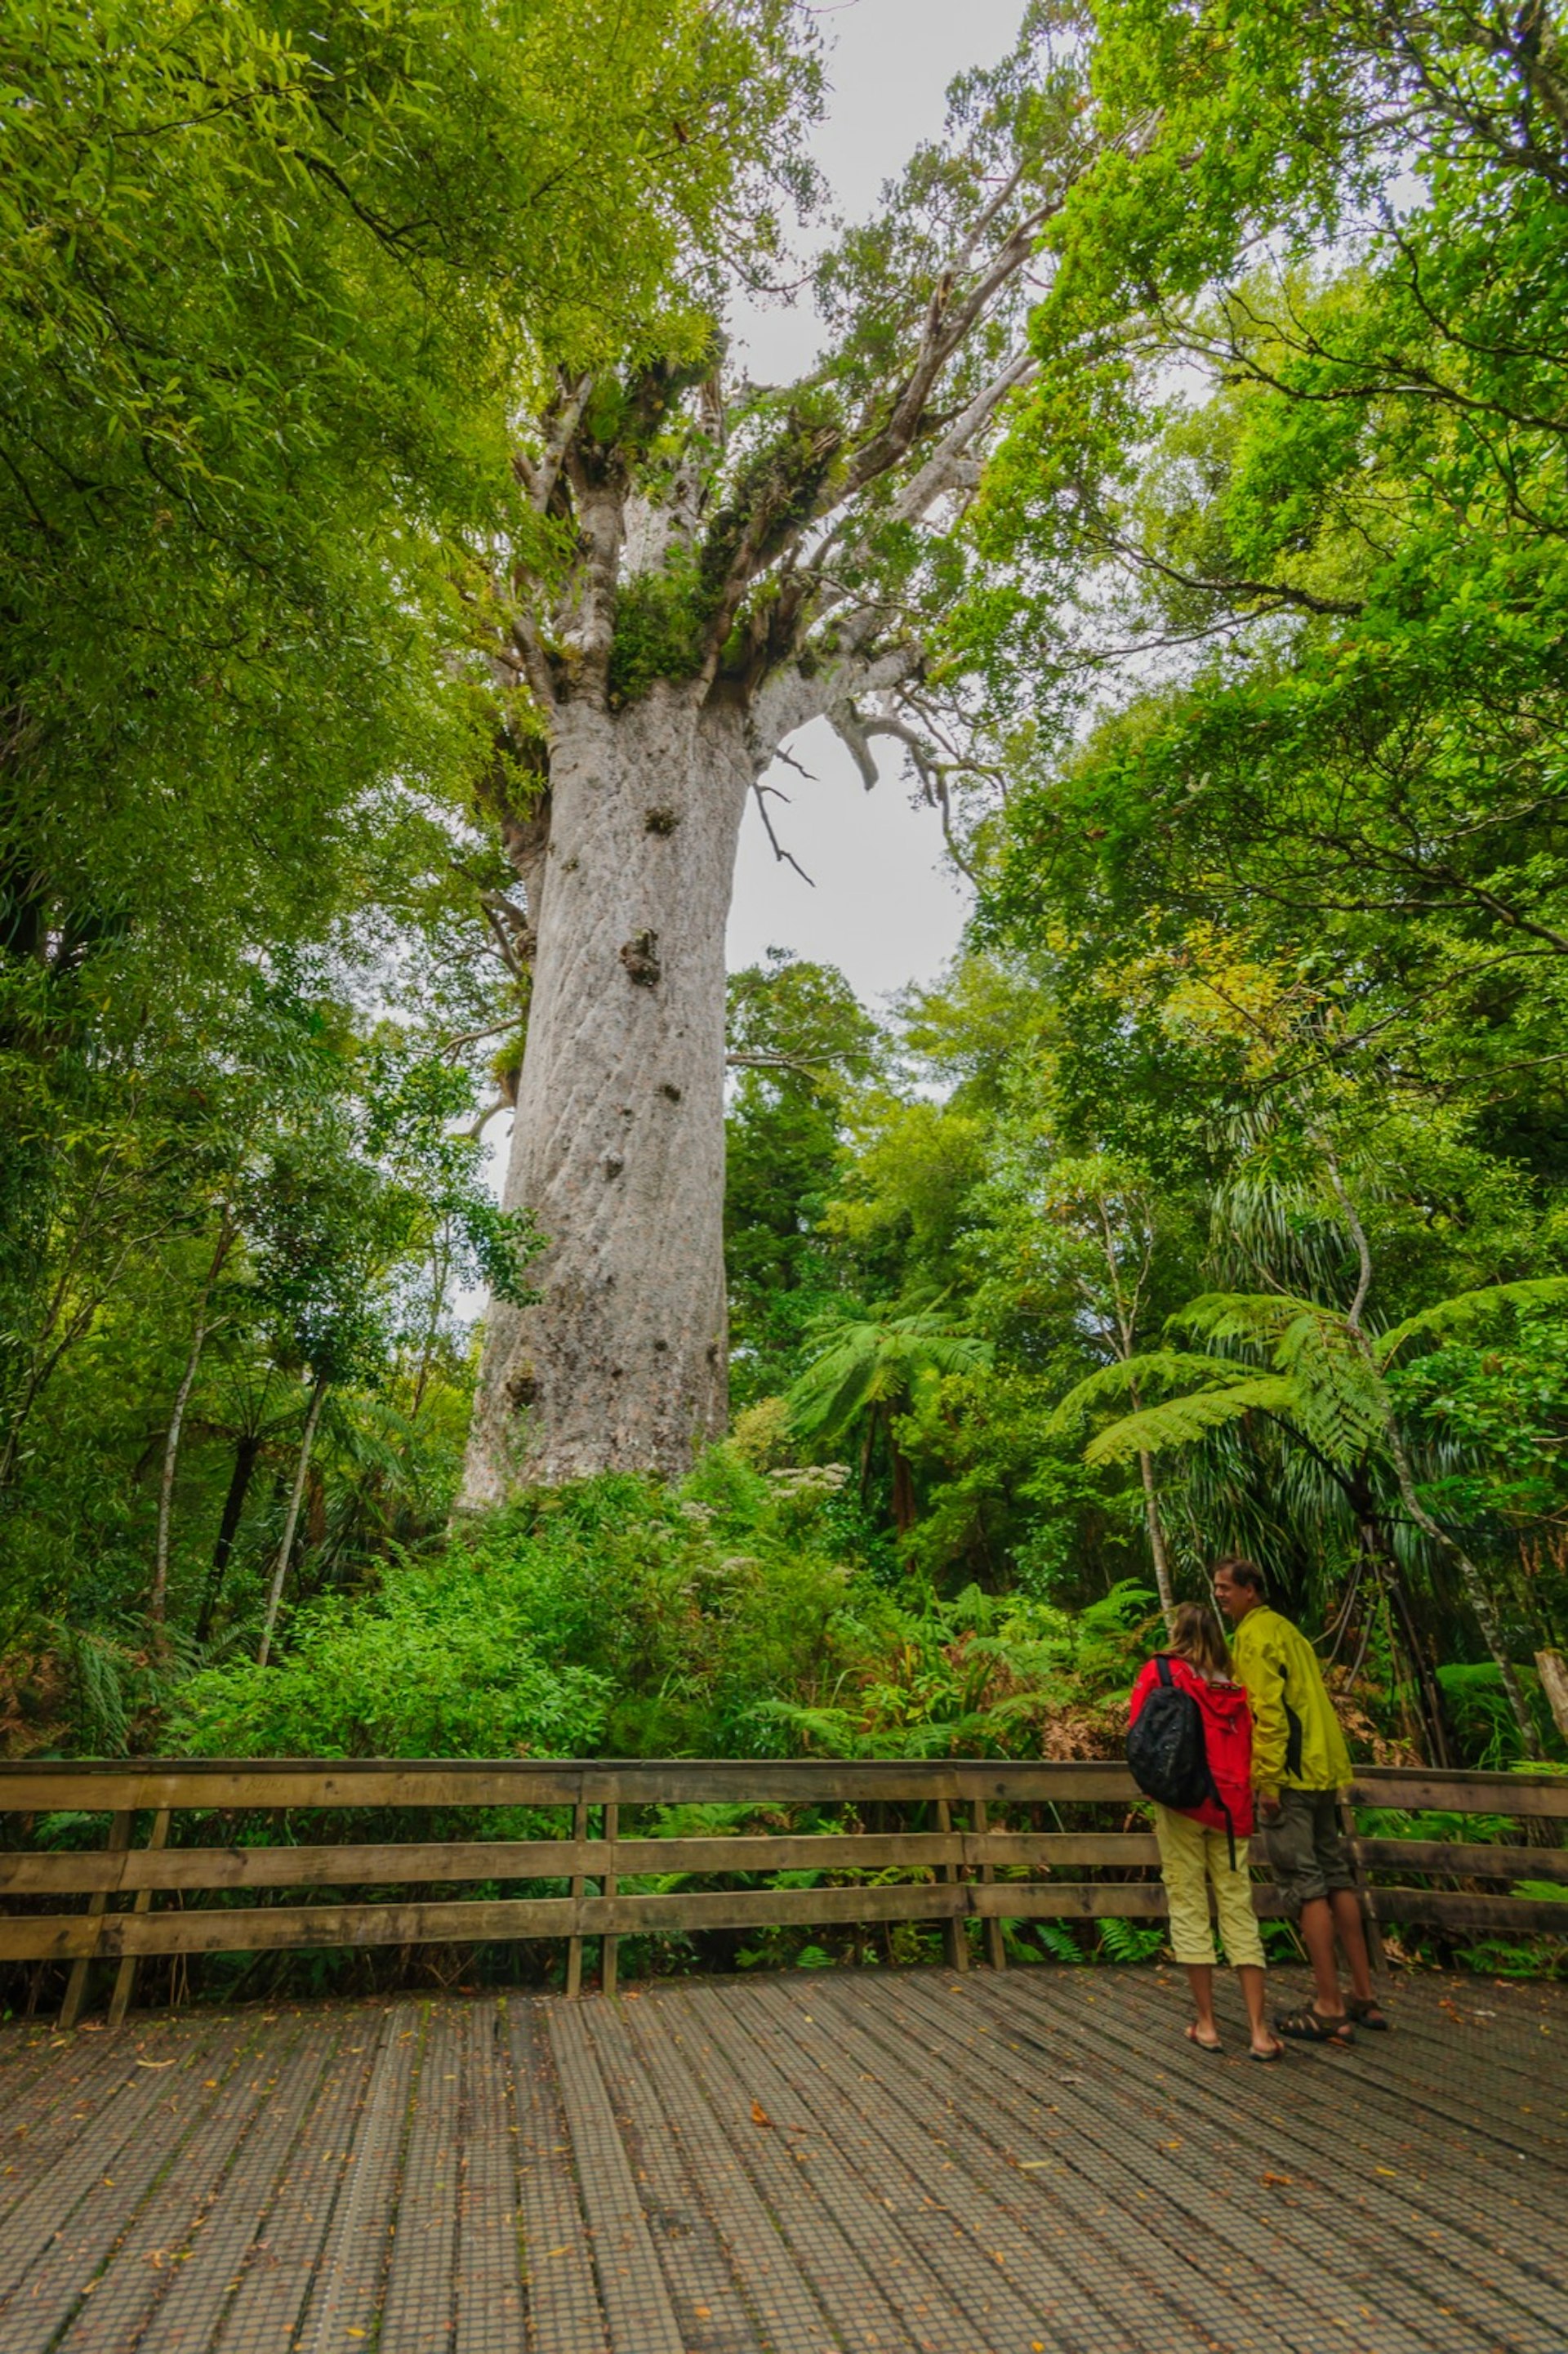 Tourists standding on a large boardwak look up to a giant kauri coniferous tree in the Waipoua Forest of Northland Region, New Zealand